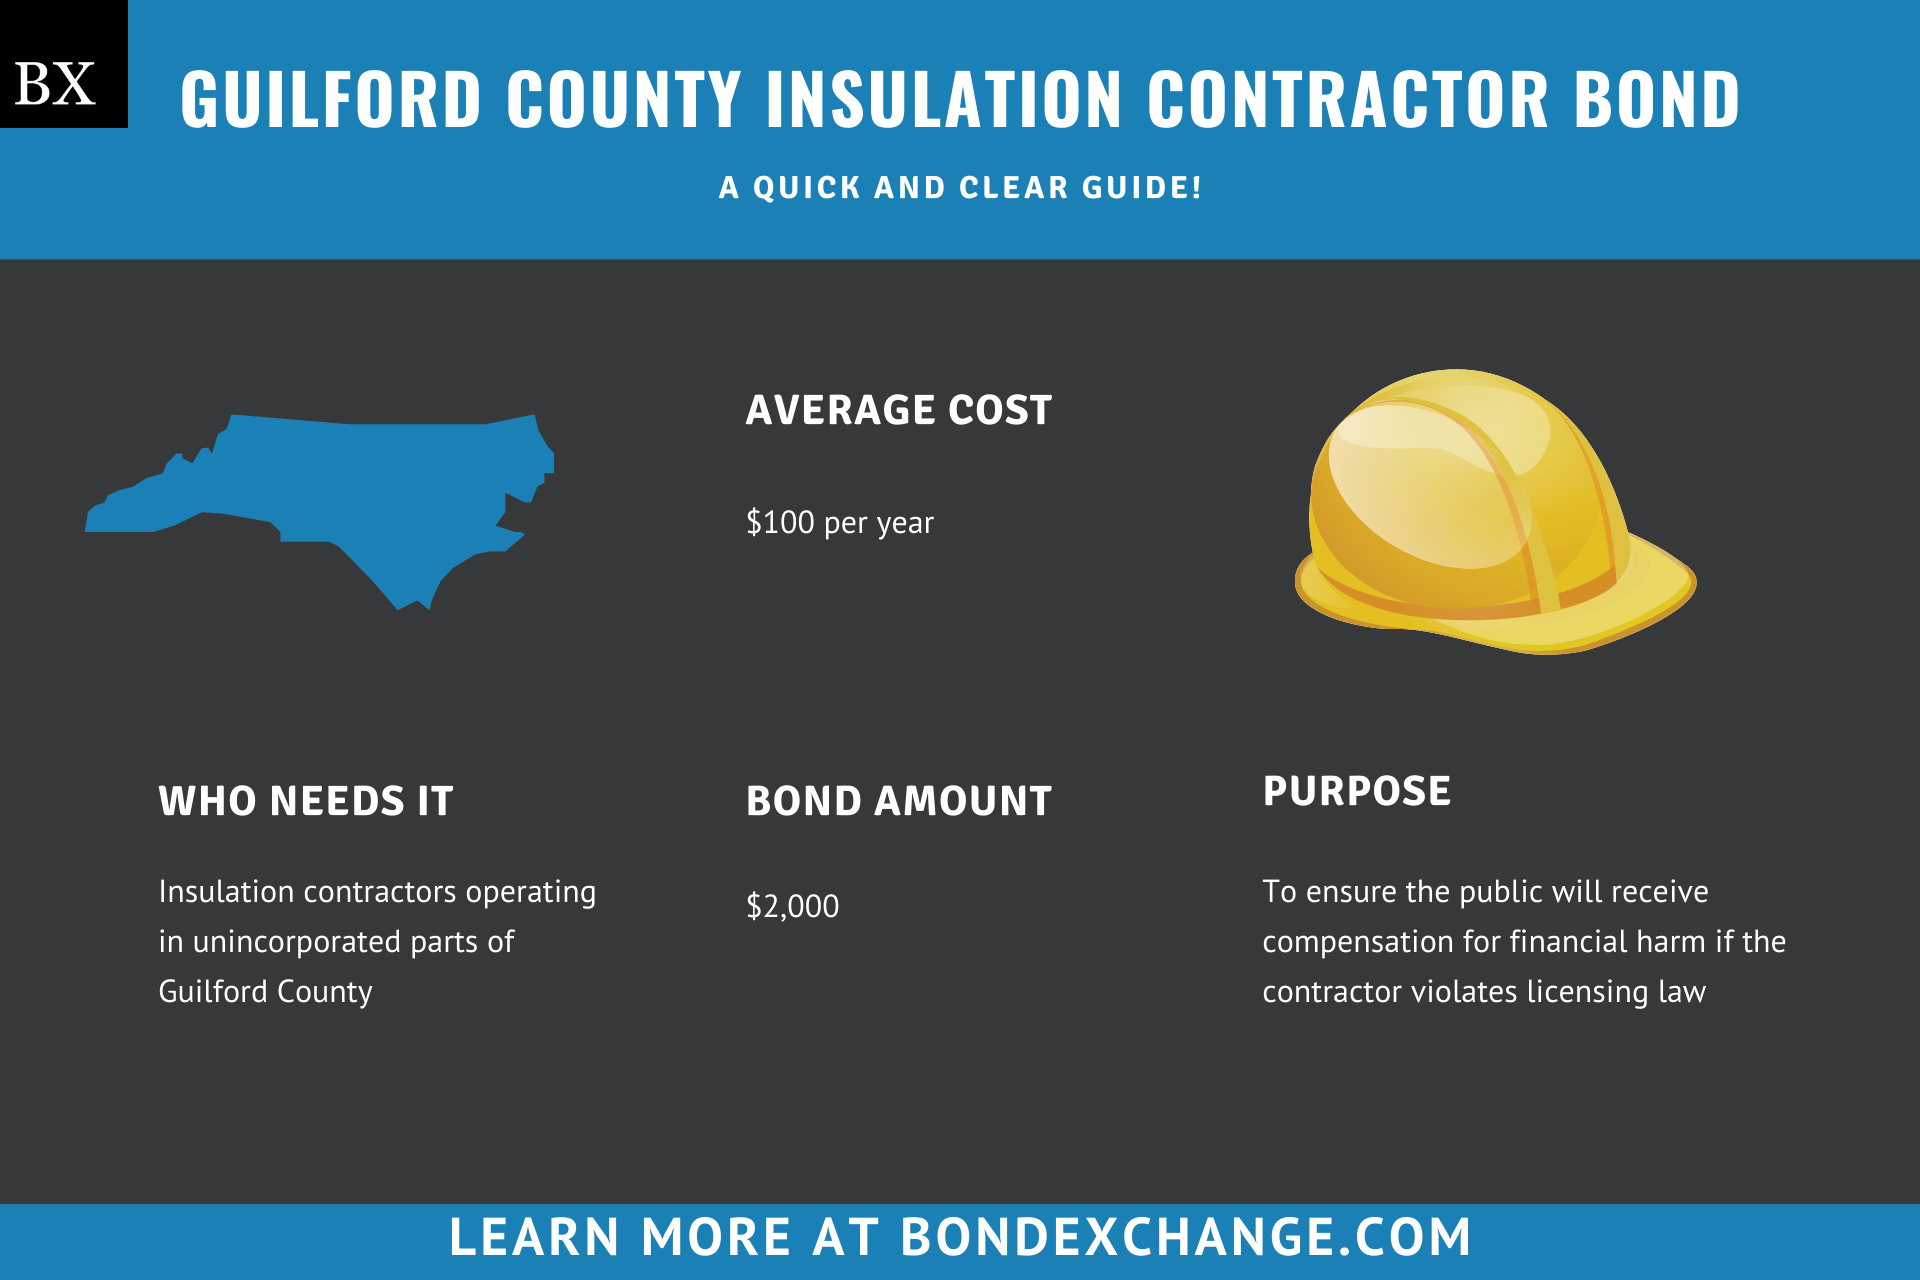 Guilford County Insulation Contractor Bond